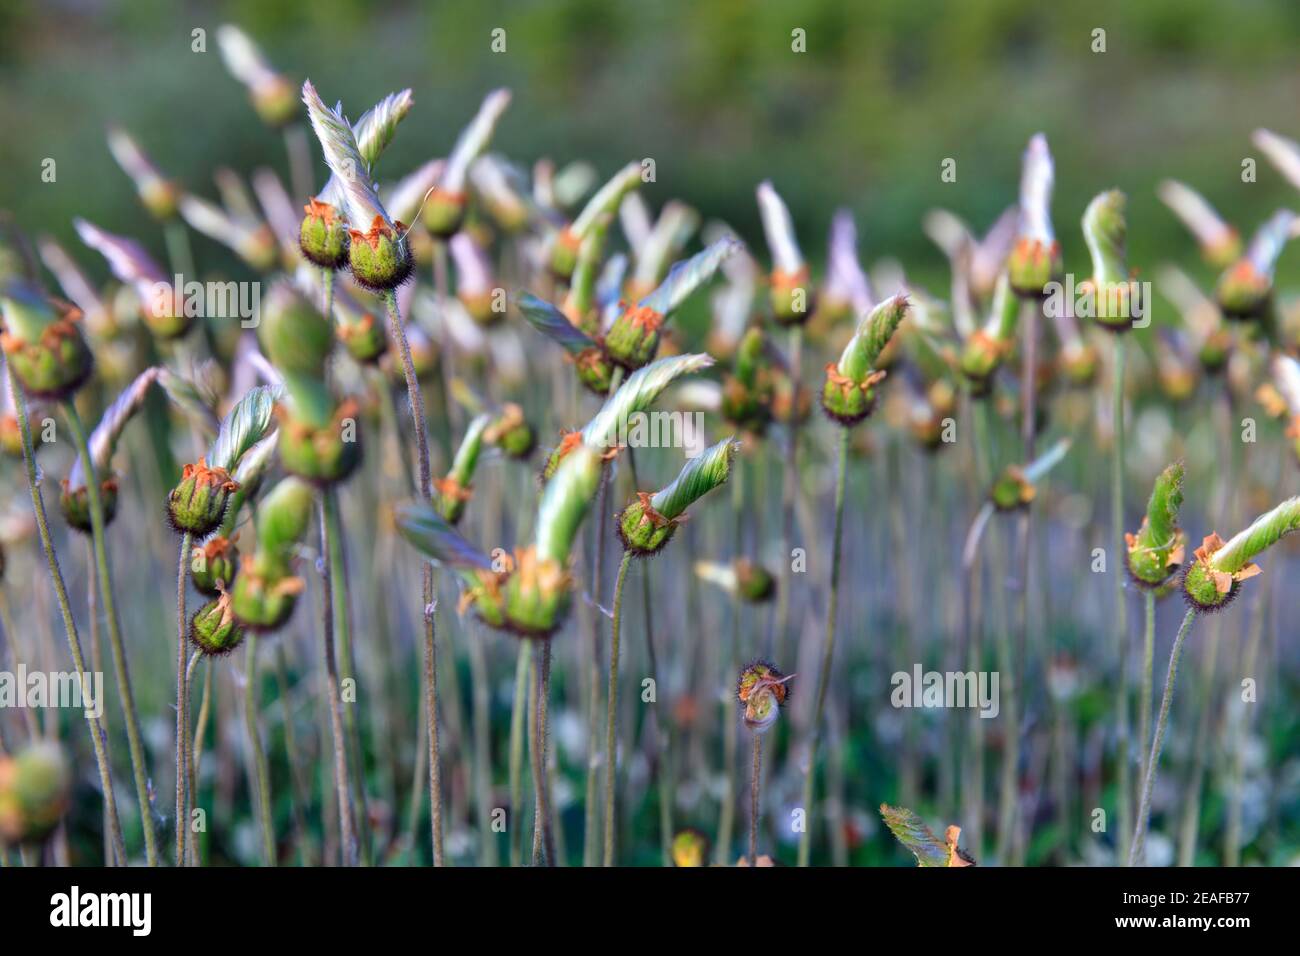 Group of Western Chalice Flowers shining in the morning light Stock Photo